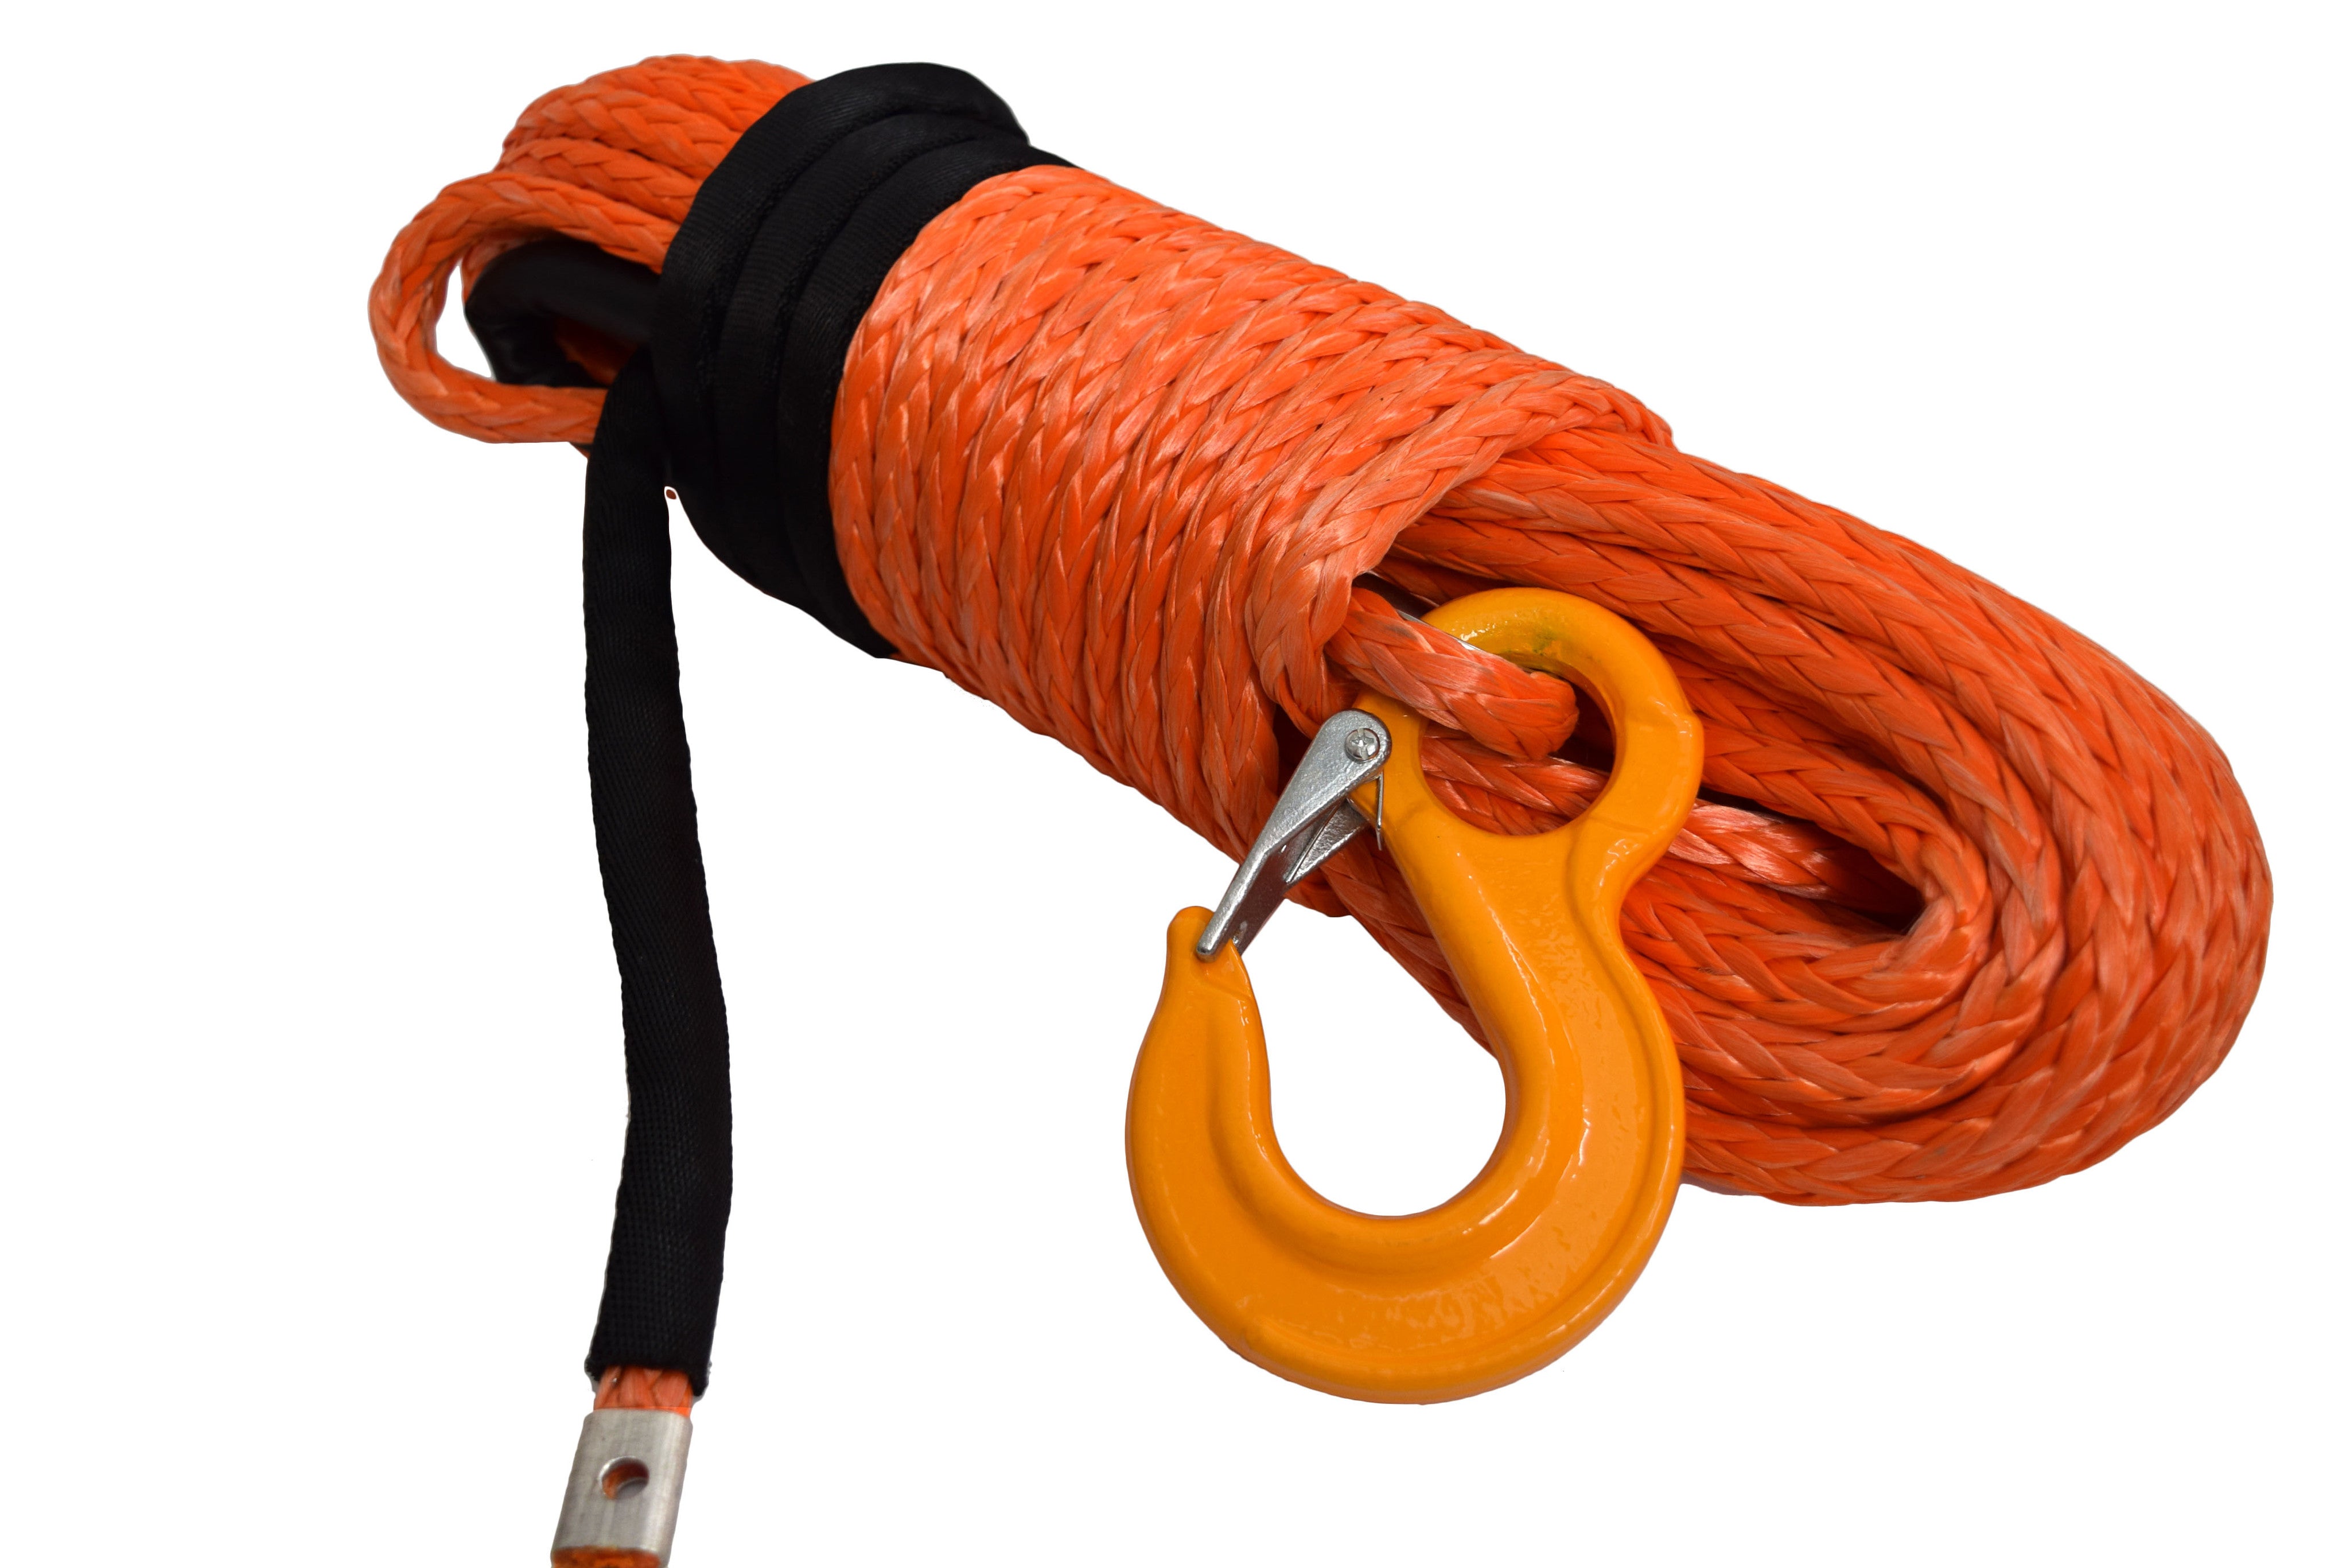 QIQU orange 100 ft 1/2 inch SUV Off-road car synthetic winch cable rope line with hook and lug